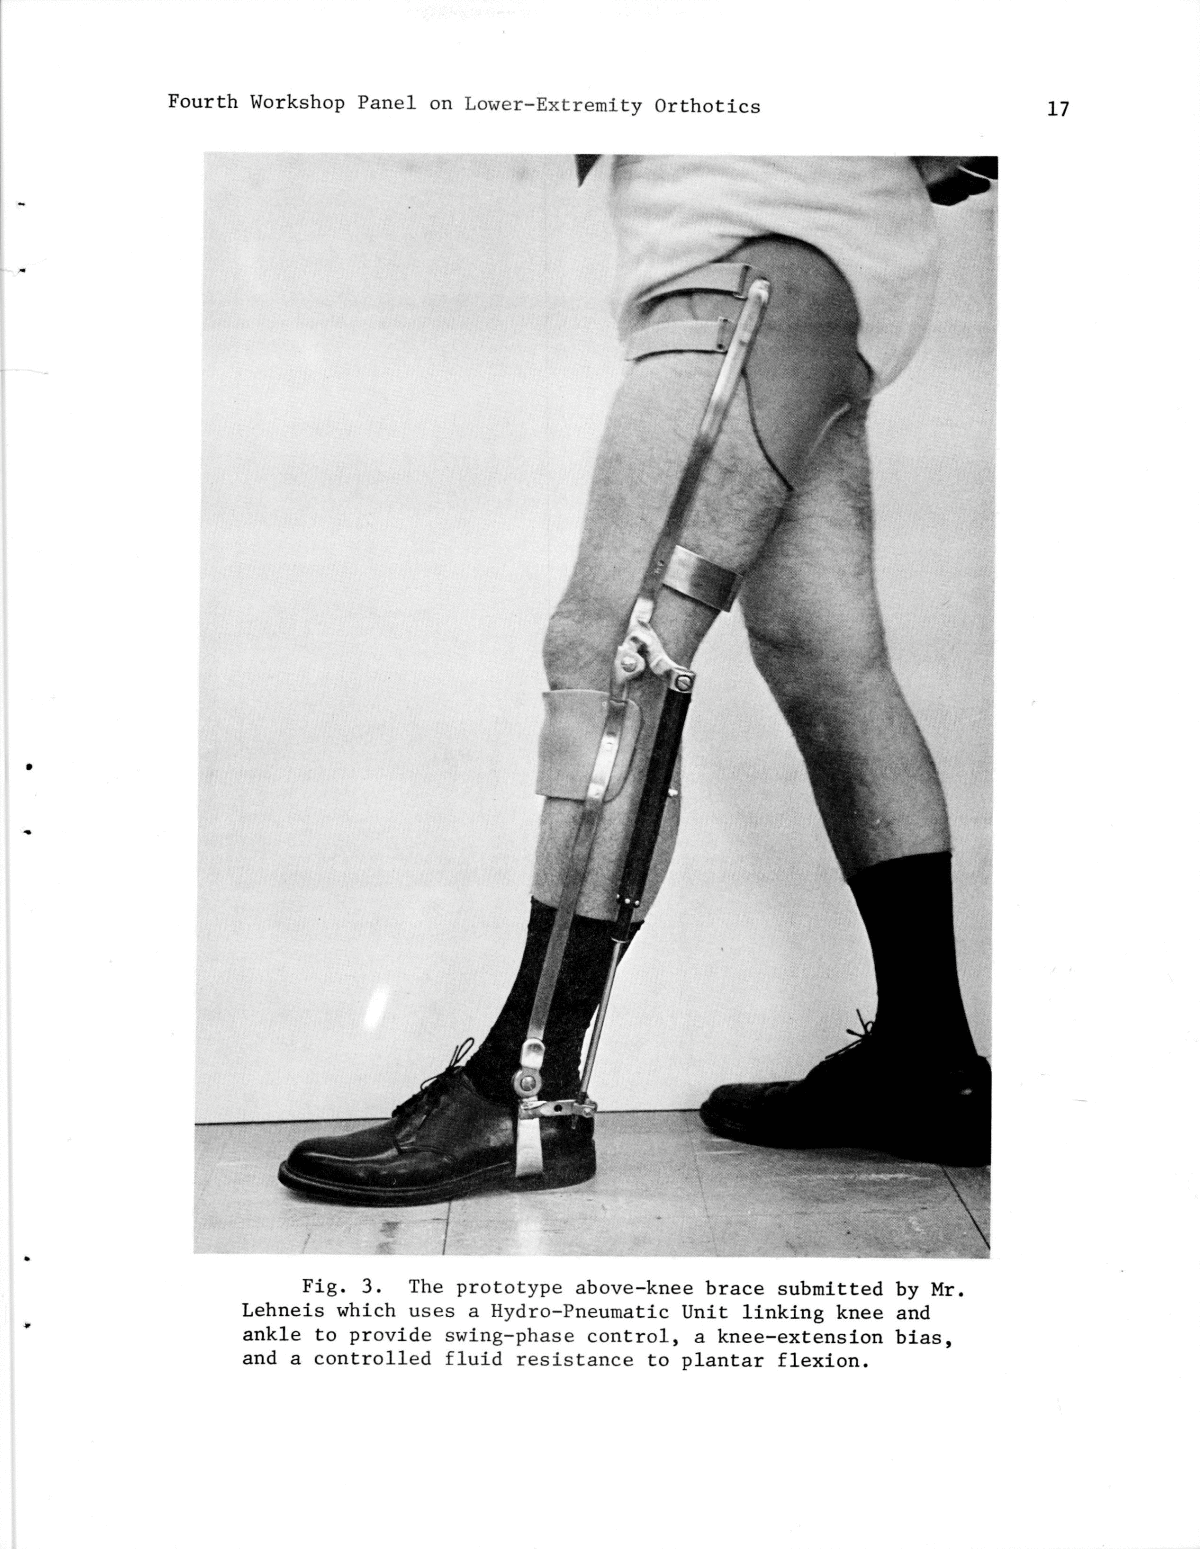 MKO Drop Foot Brace for dorsal flexion support and drop foot.